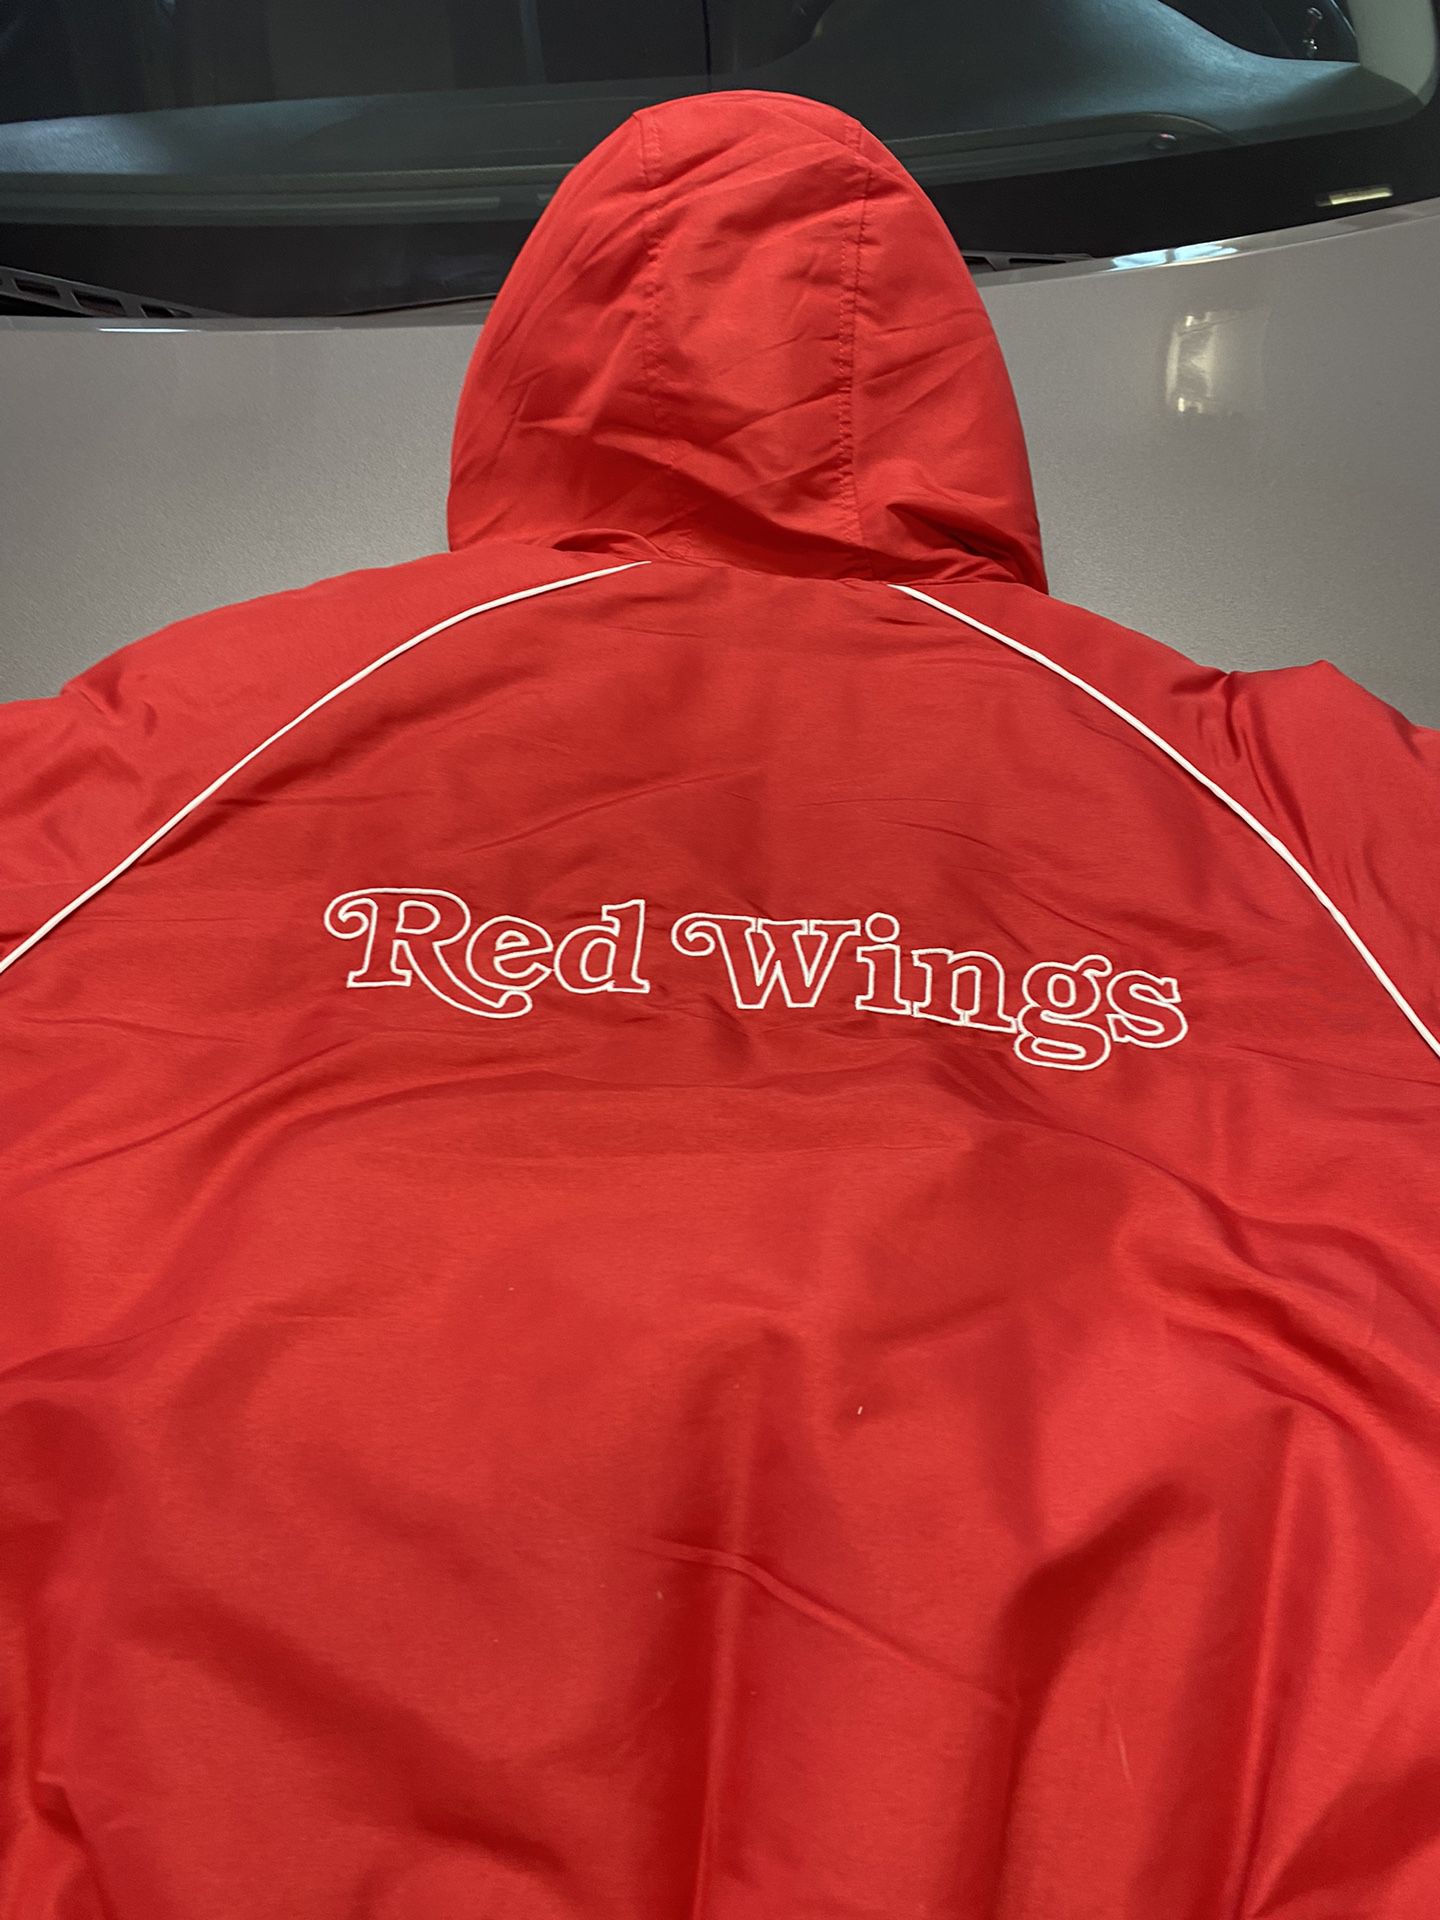 Detroit Redwings Official Nhl Jacket And Shirt